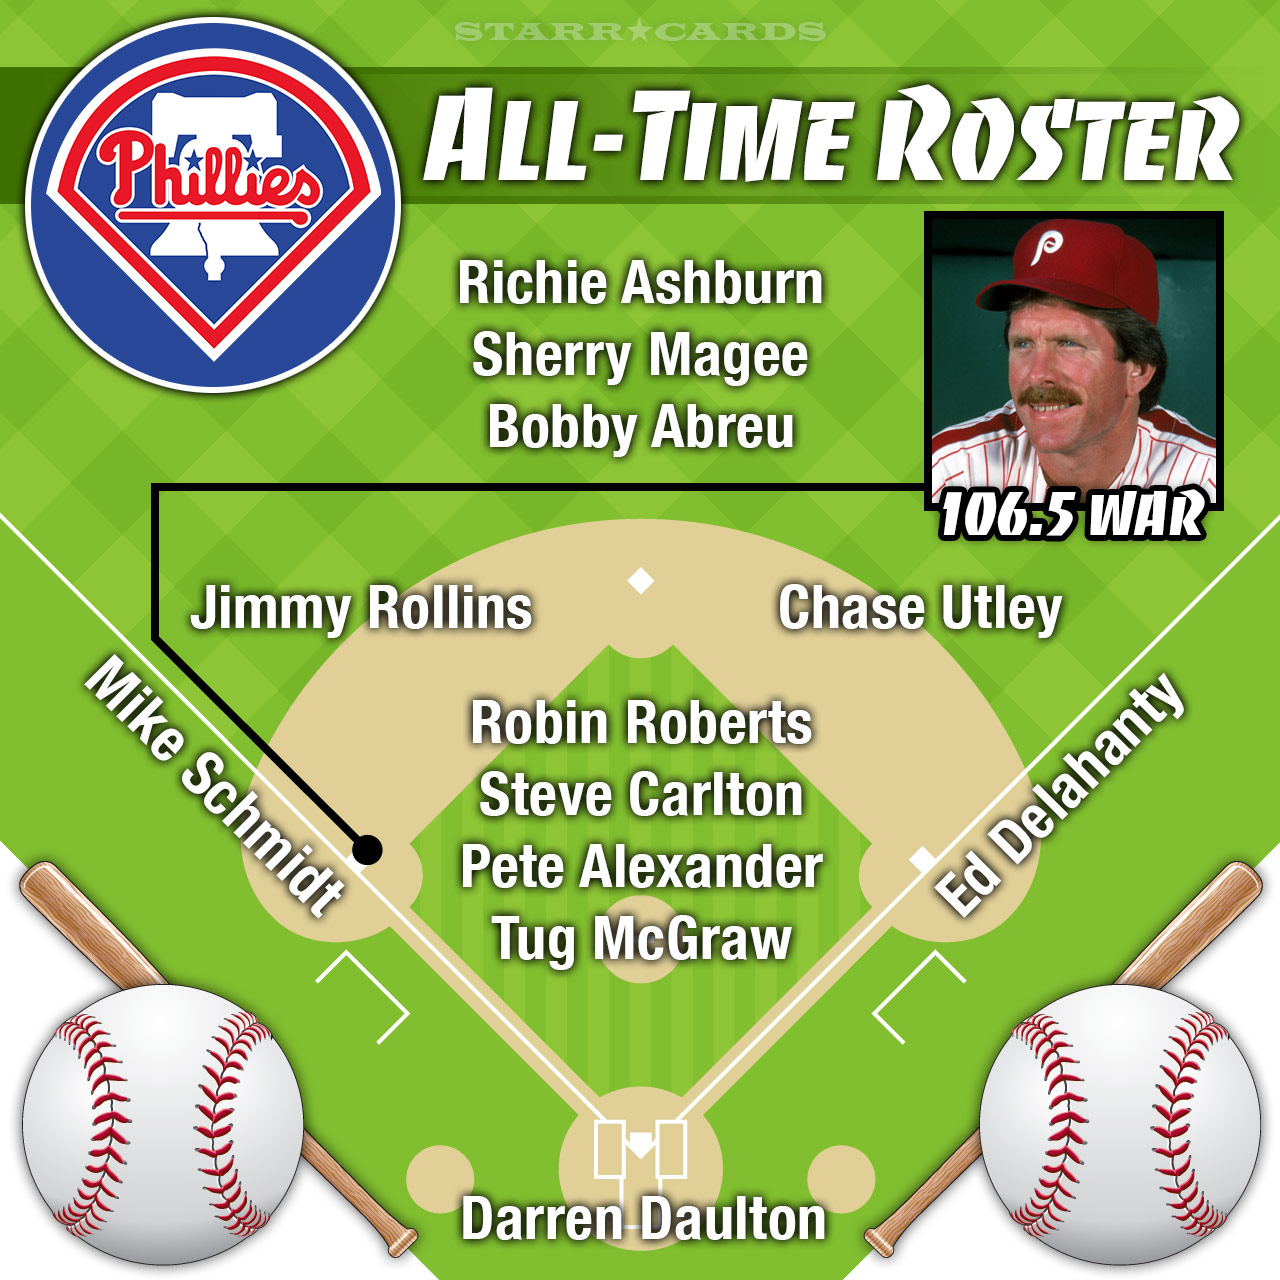 Is this an all-time great Phillies team?